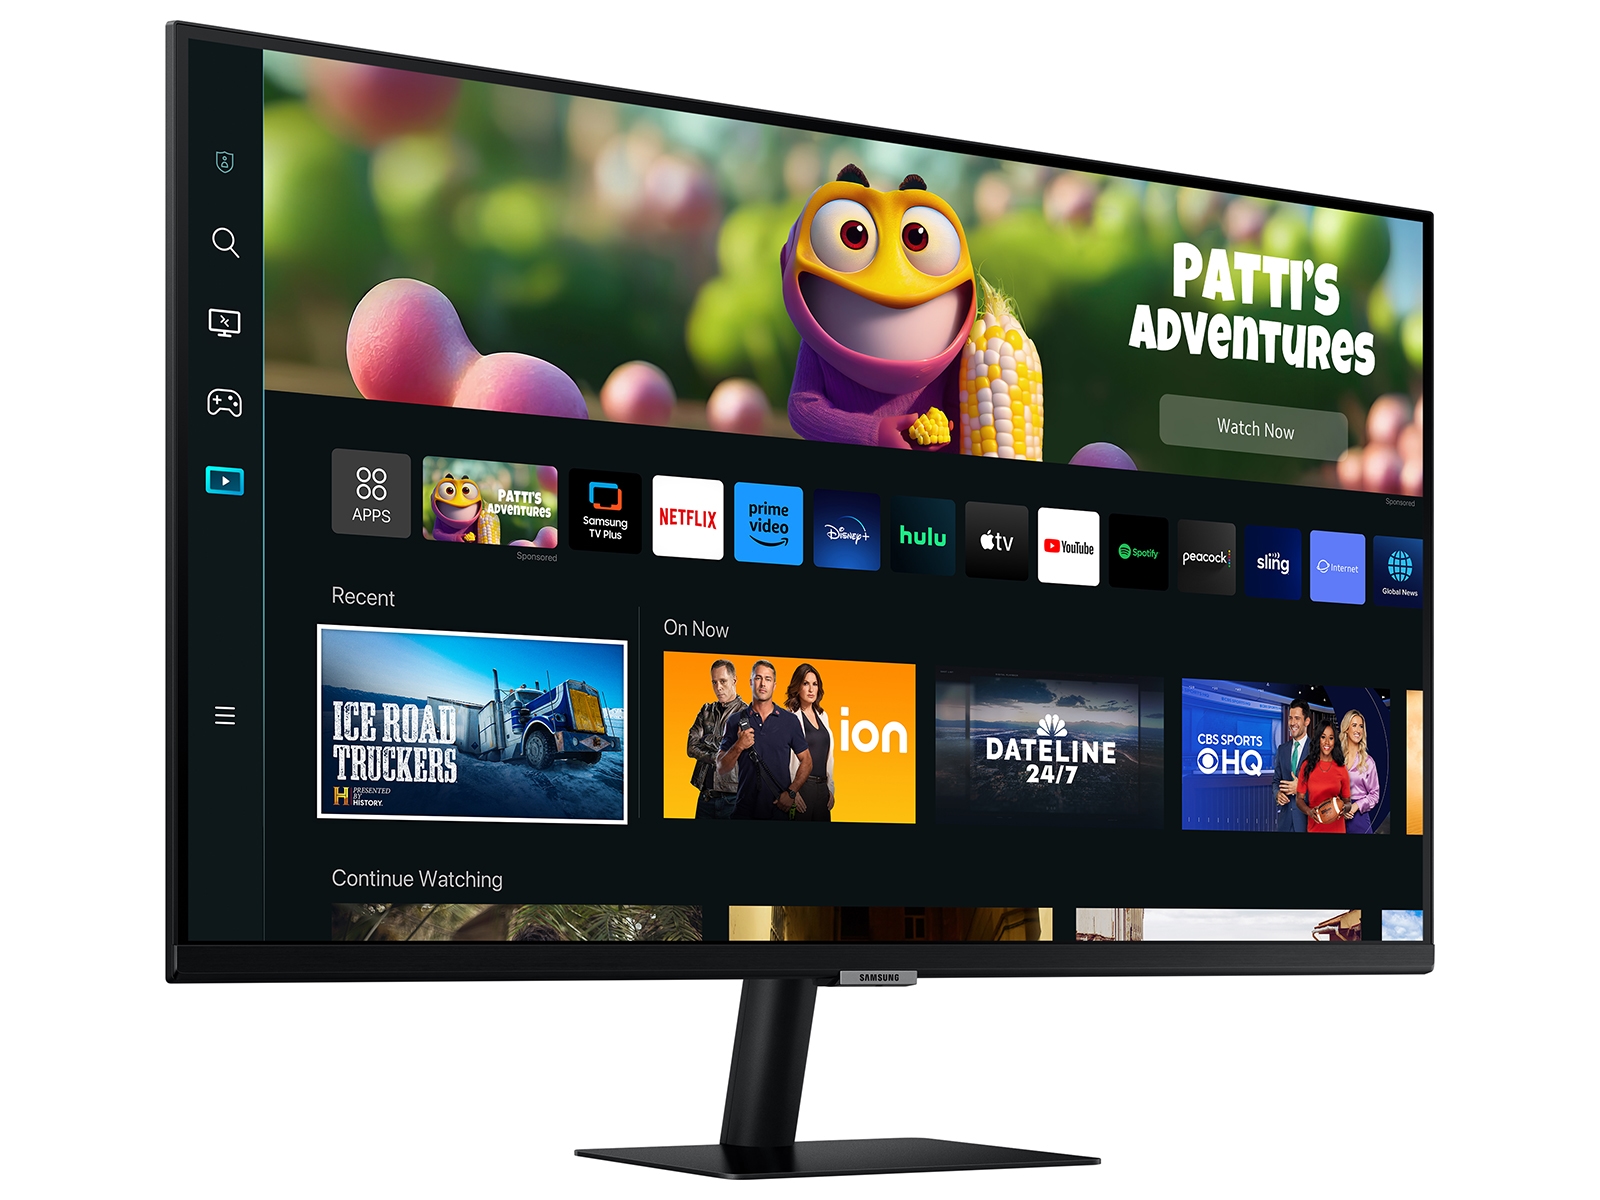 Thumbnail image of Samsung 32“ Class M50C Series FHD Smart Monitor with Streaming TV